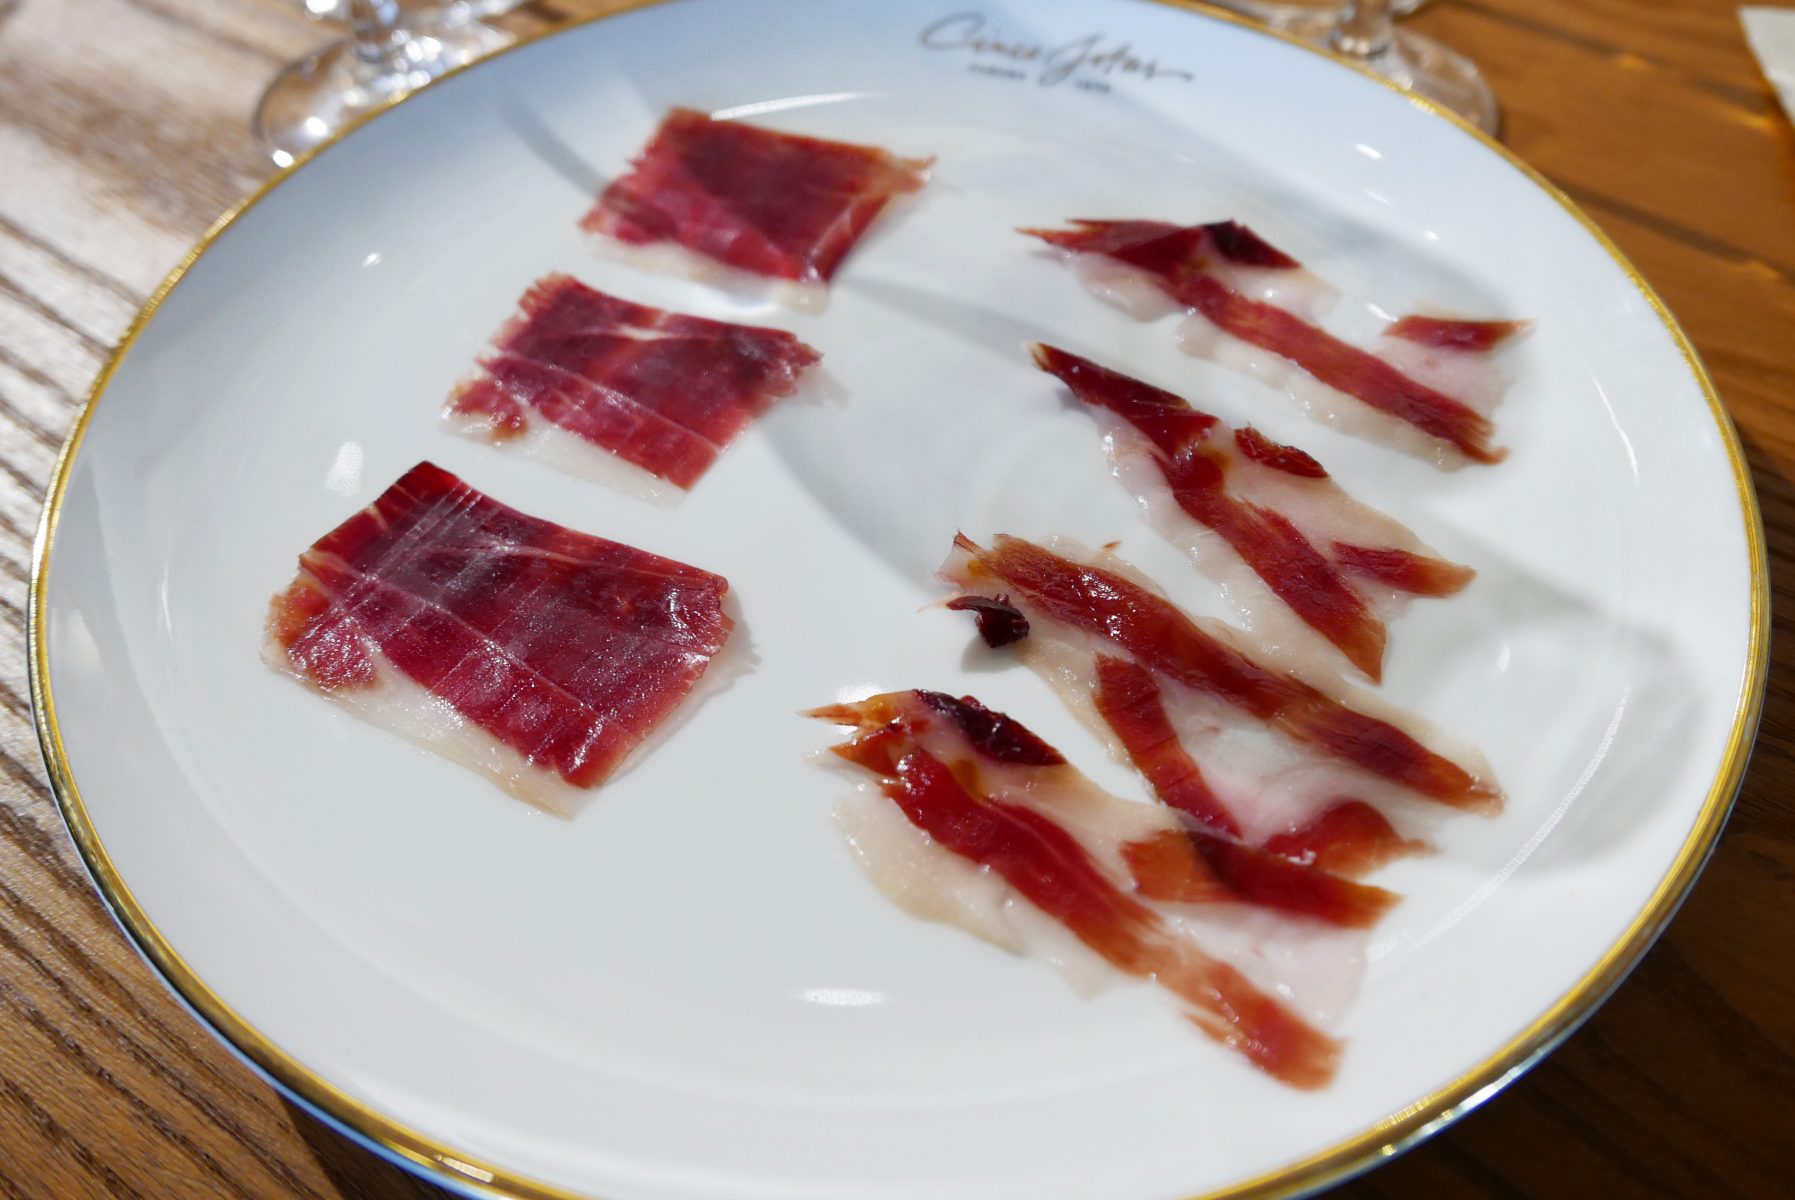 Jamon from different parts of the leg